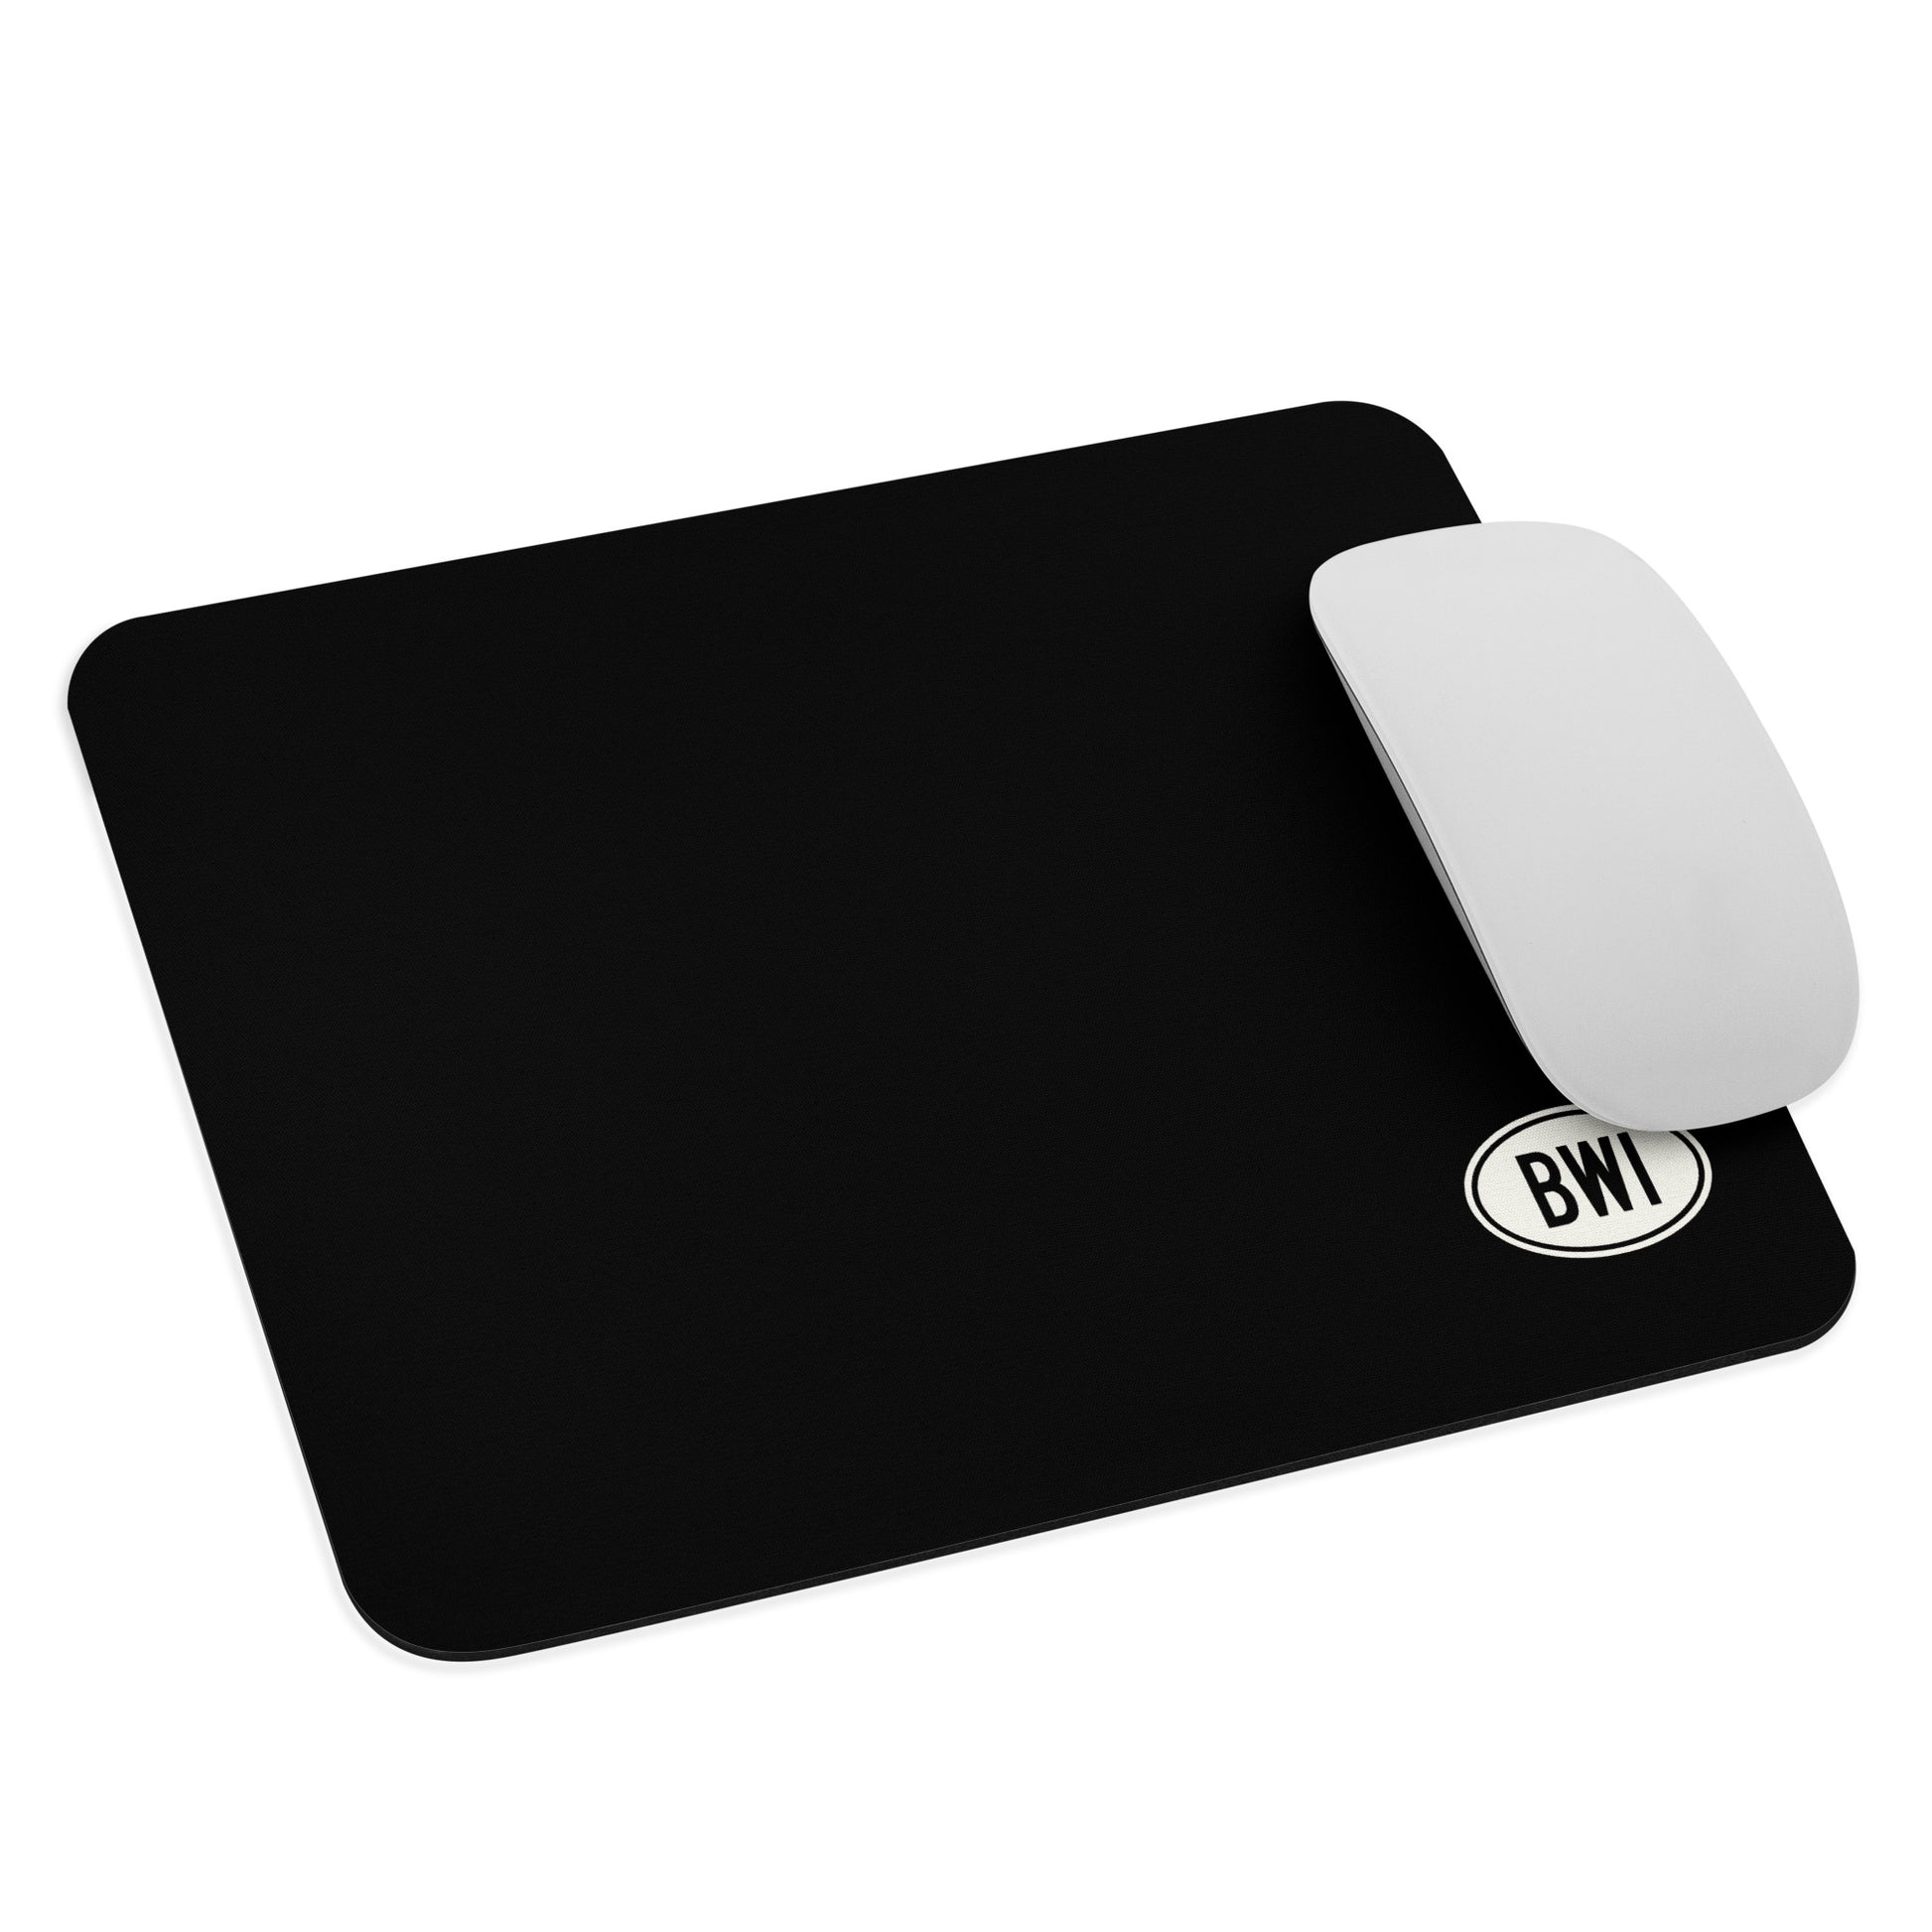 Unique Travel Gift Mouse Pad - White Oval • BWI Baltimore • YHM Designs - Image 03